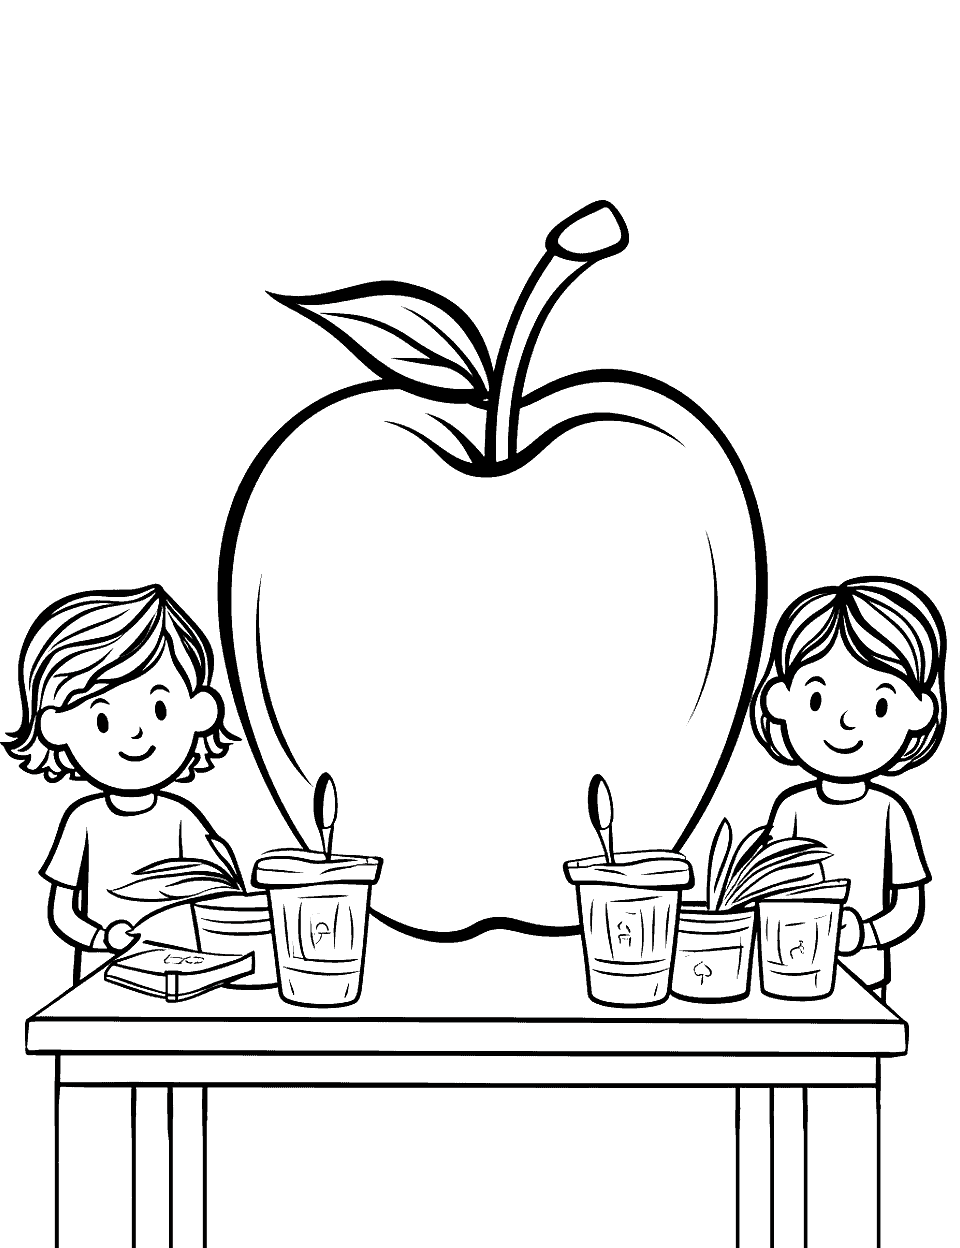 School Apple Project Coloring Page - Children in a classroom working on an apple-themed craft.